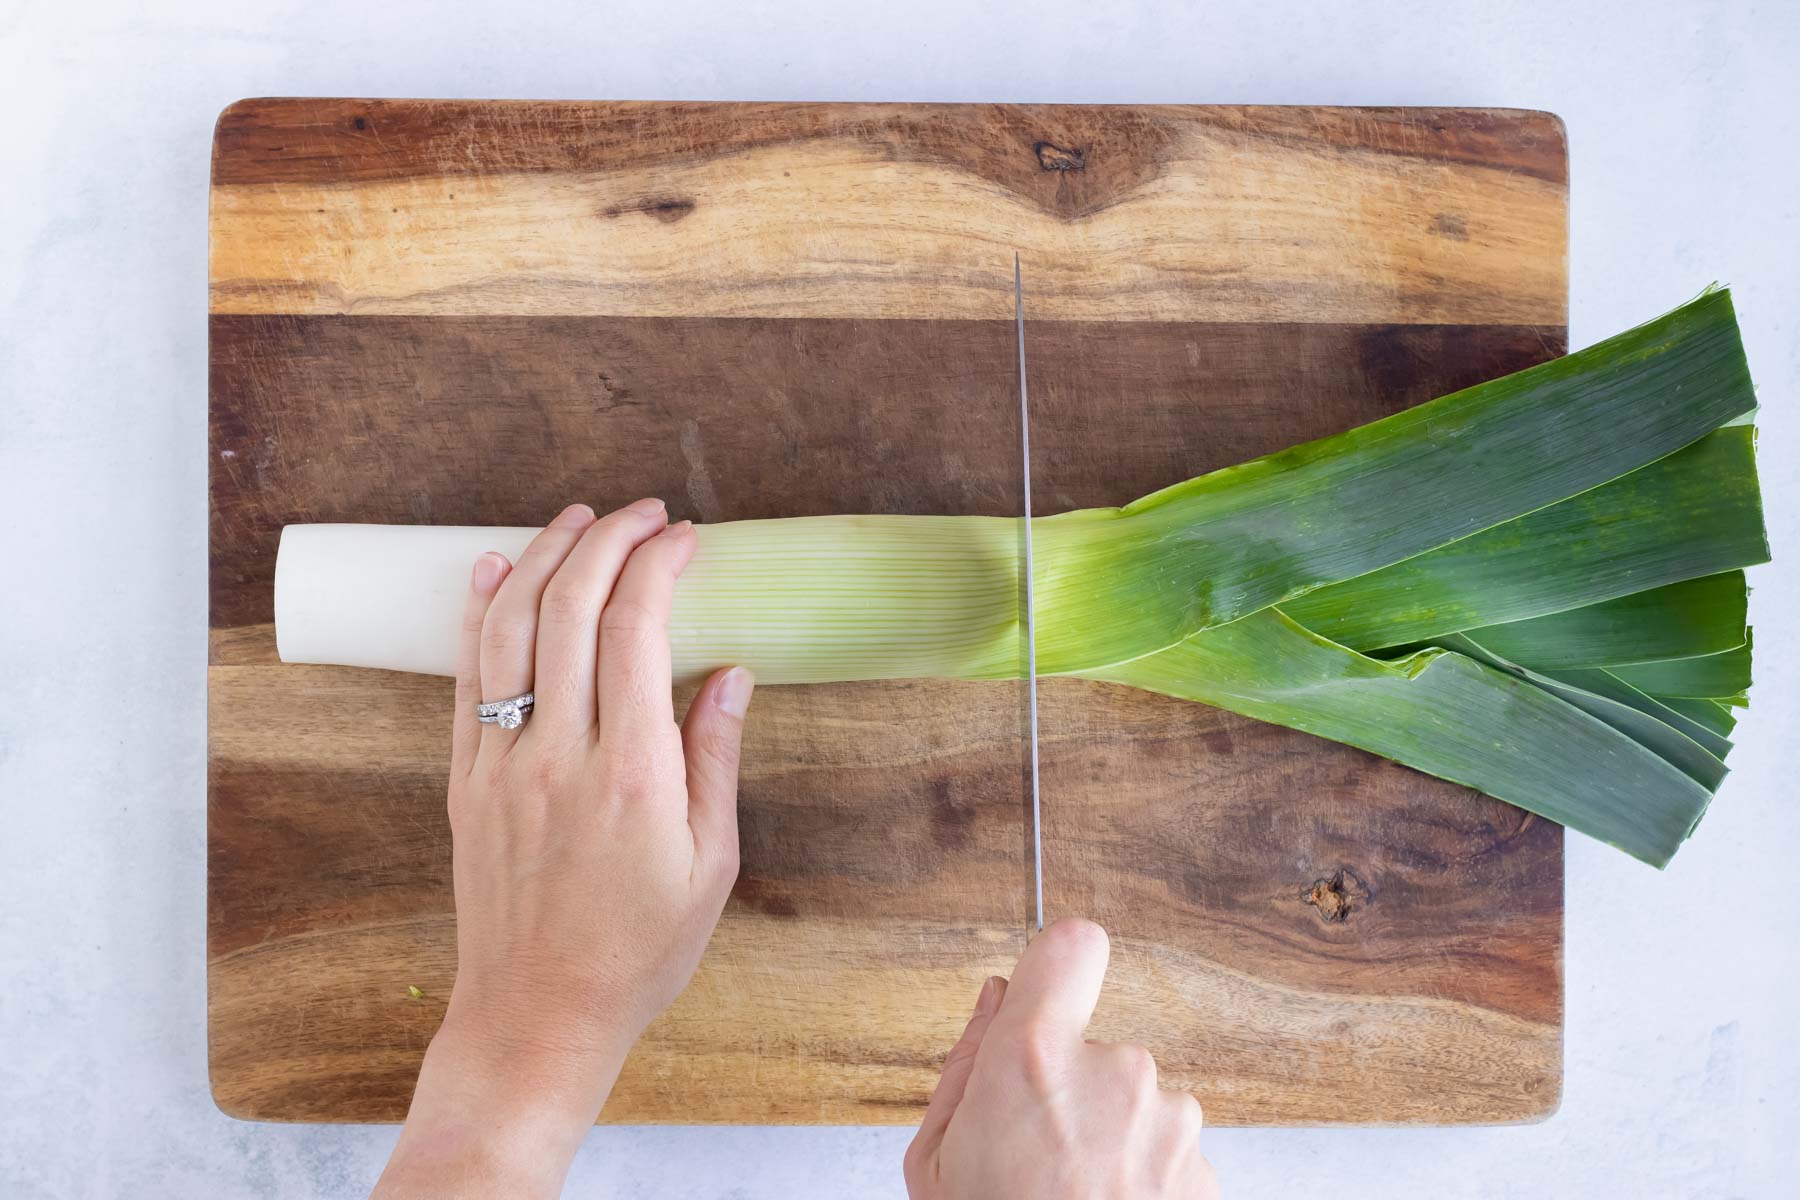 The green leaves of a leek being cut off and discarded on a wooden cutting board.